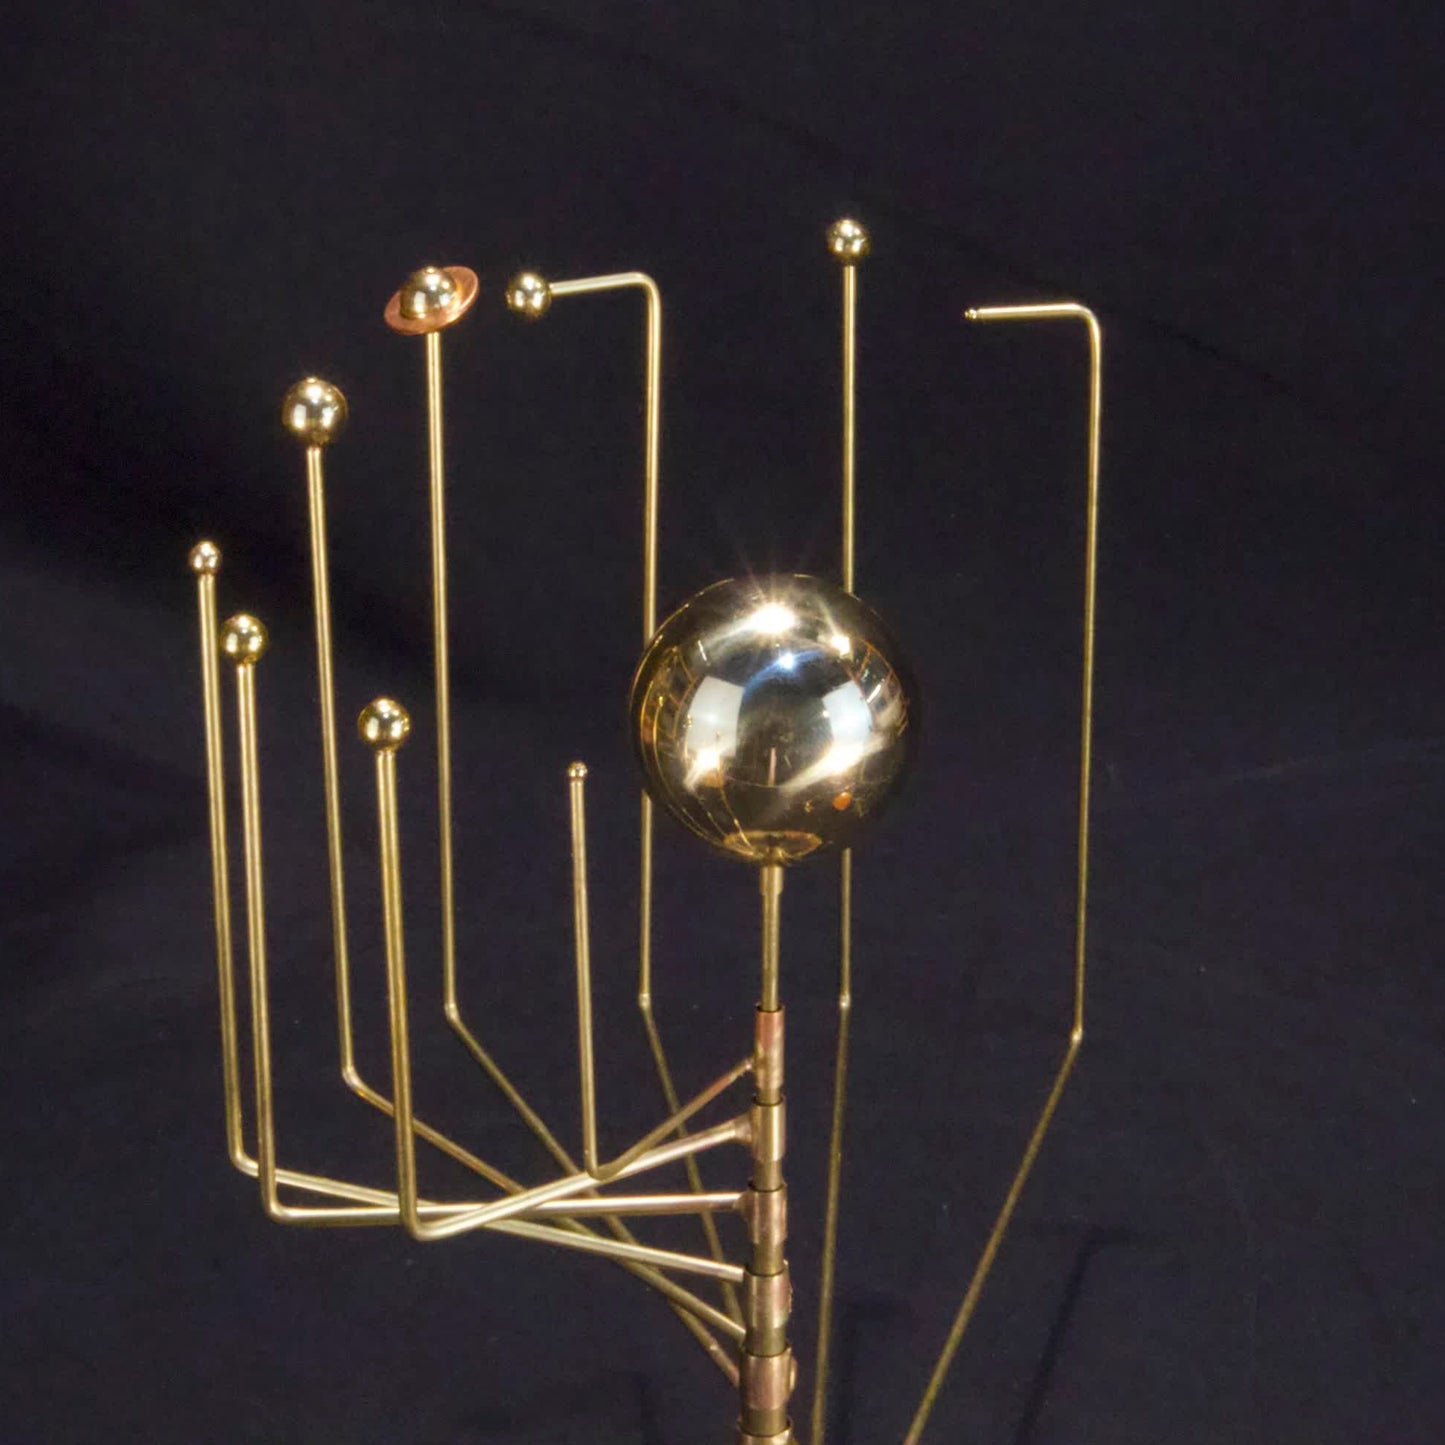 Close up of orrery with brass Sun and planets